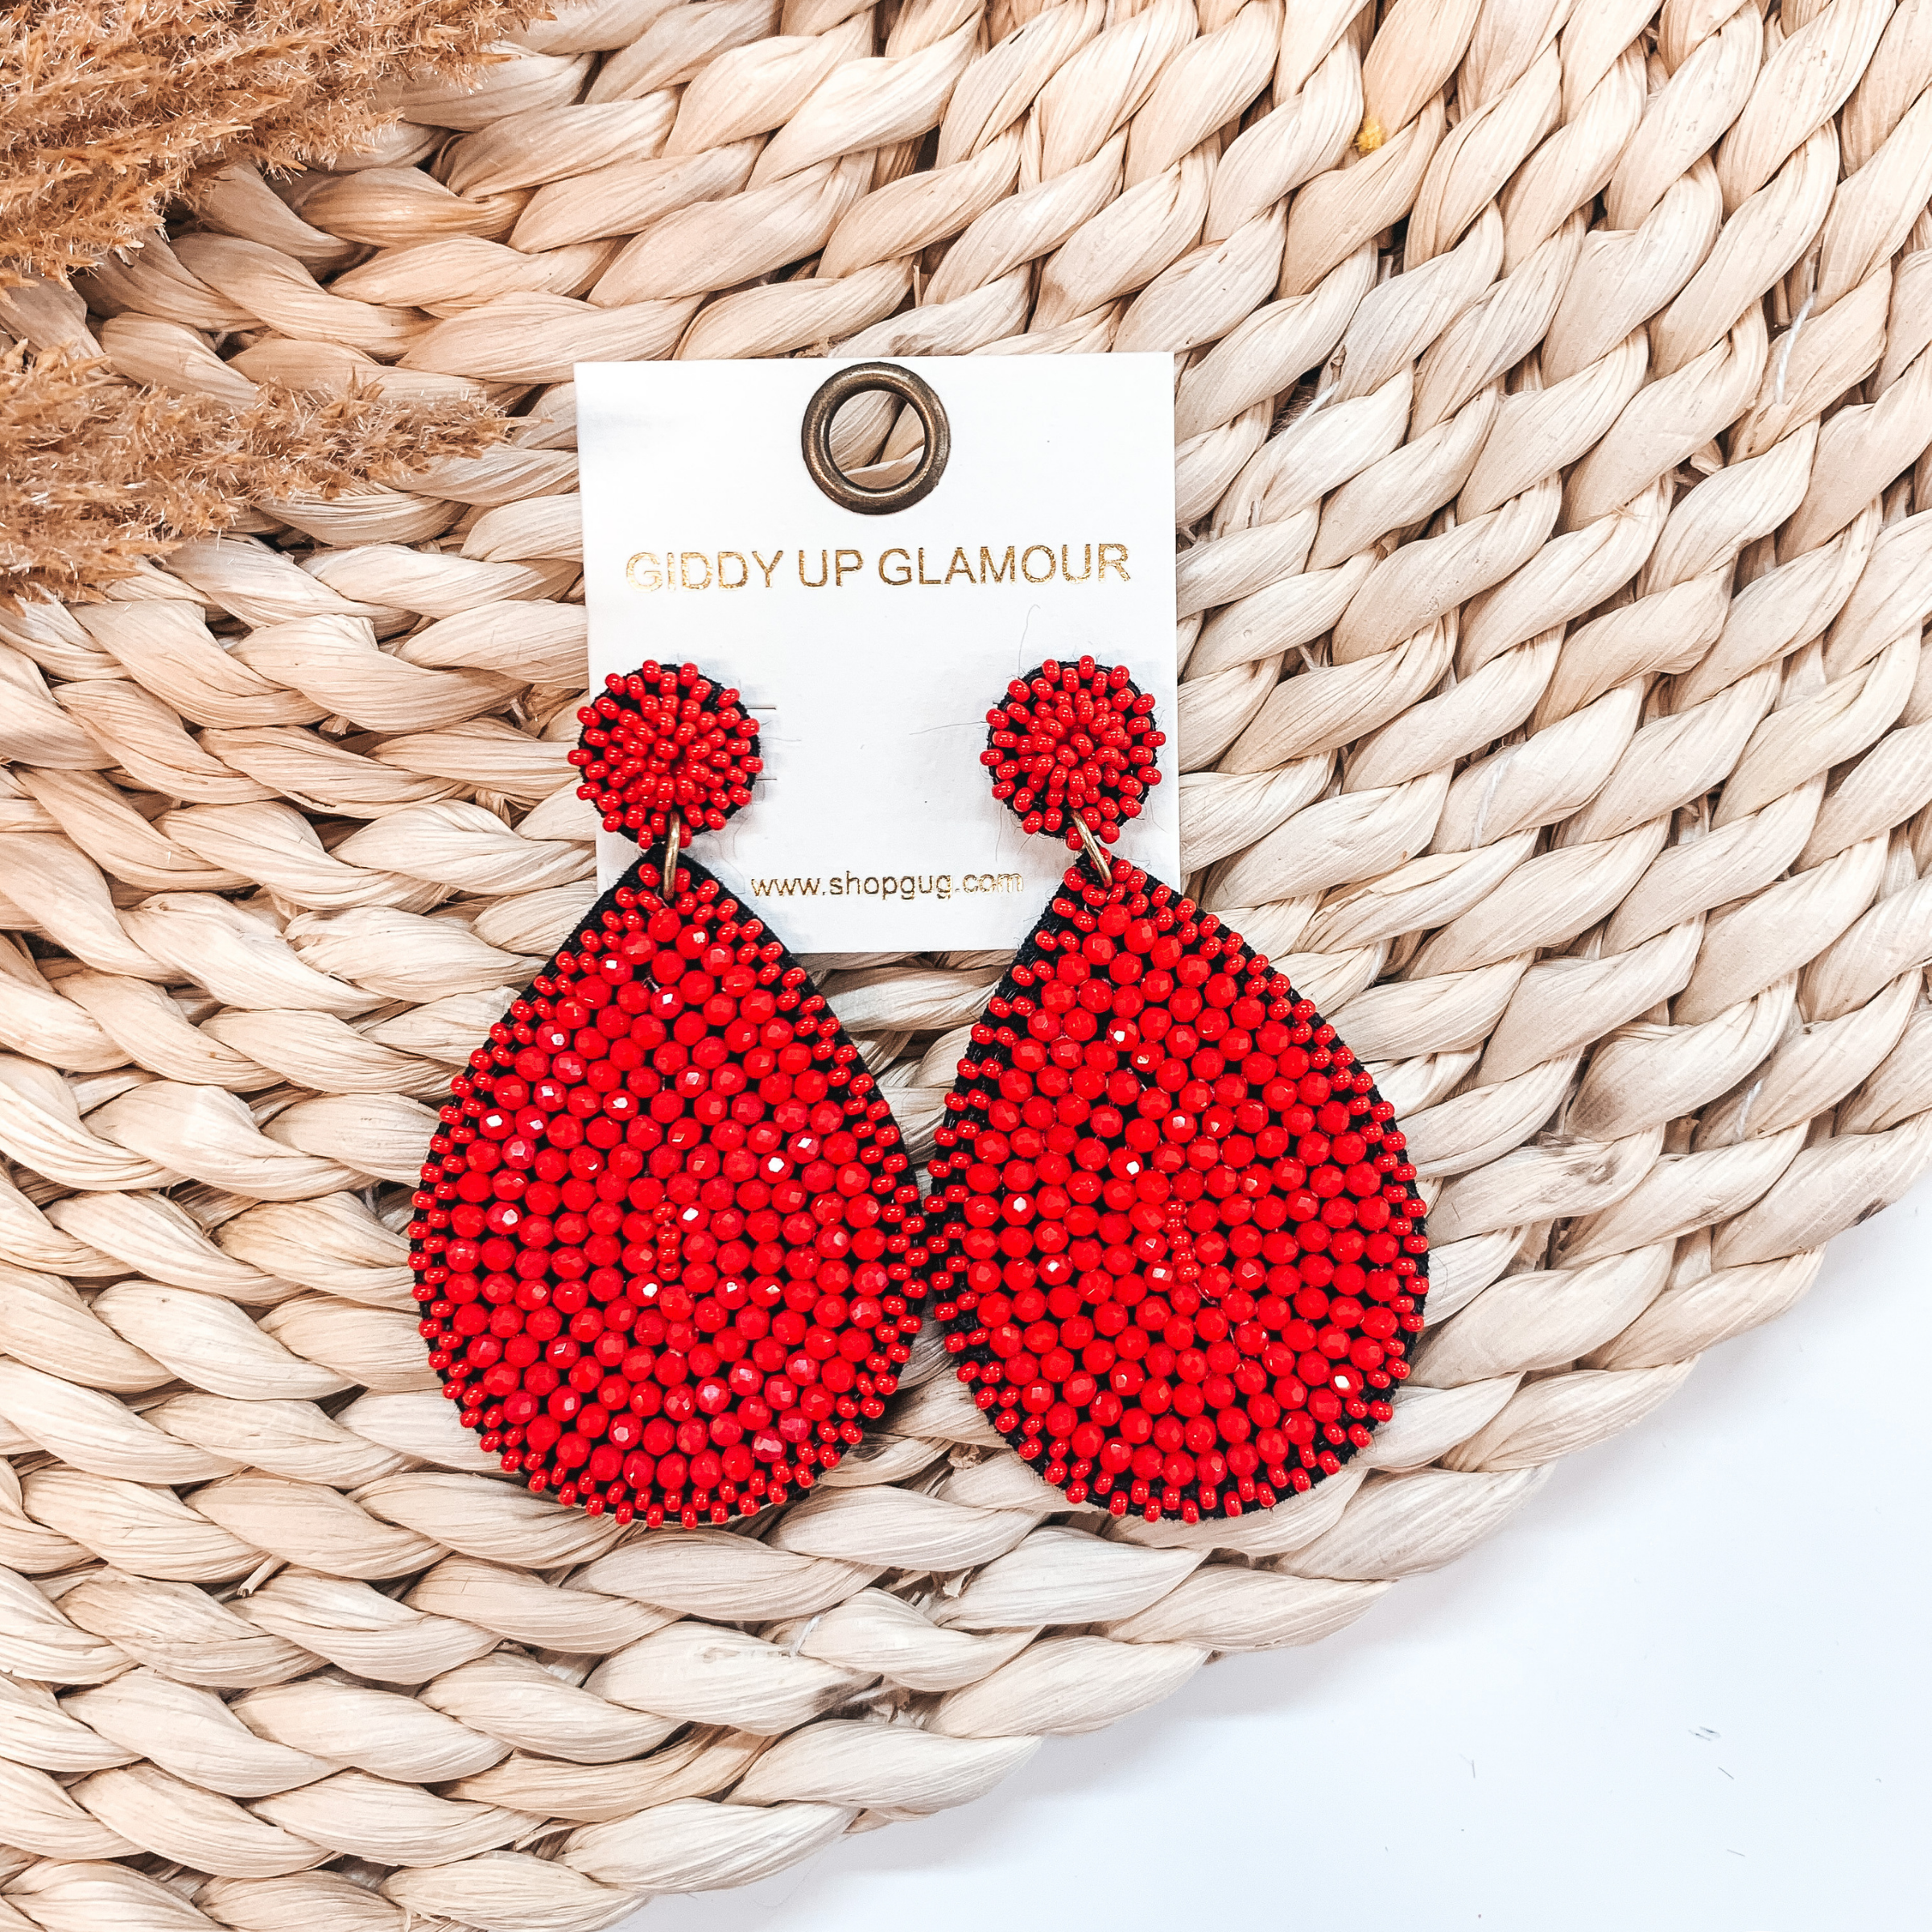 A pair of red crystal beaded teardrop earrings pictured on a basket weave display with pampus grass.